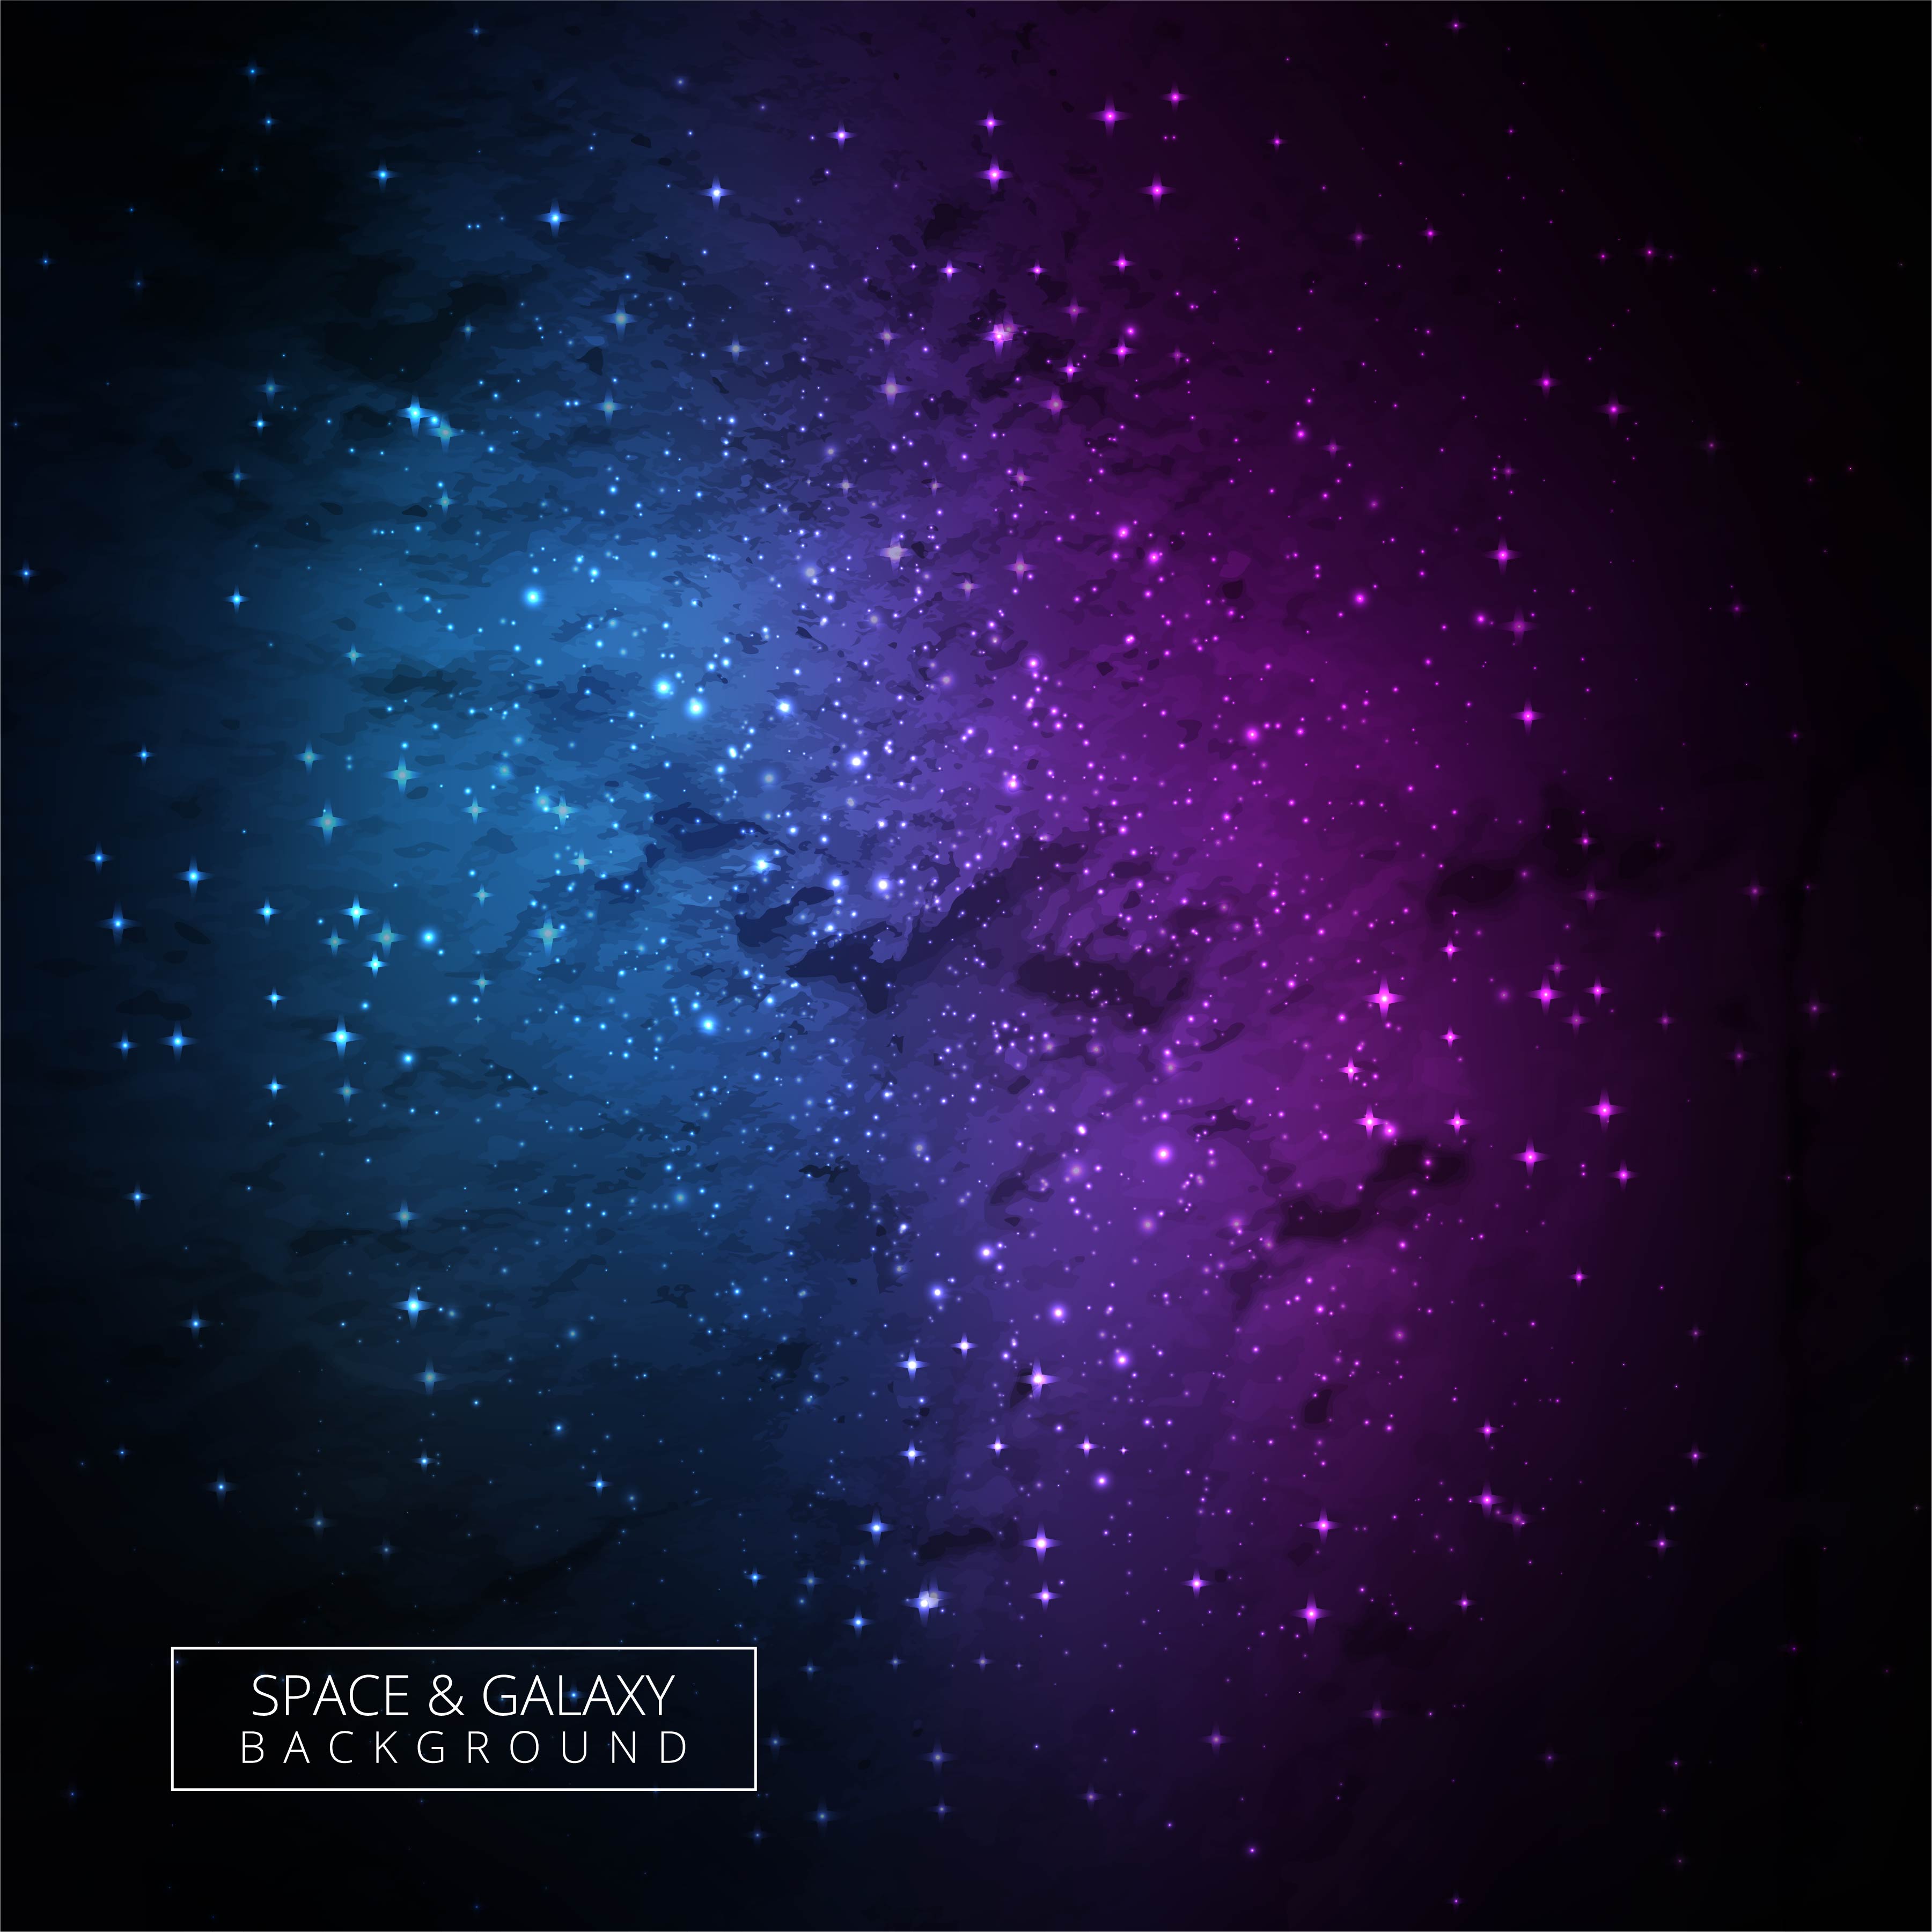 Universe Colorful Galaxy Background Download Free Vectors